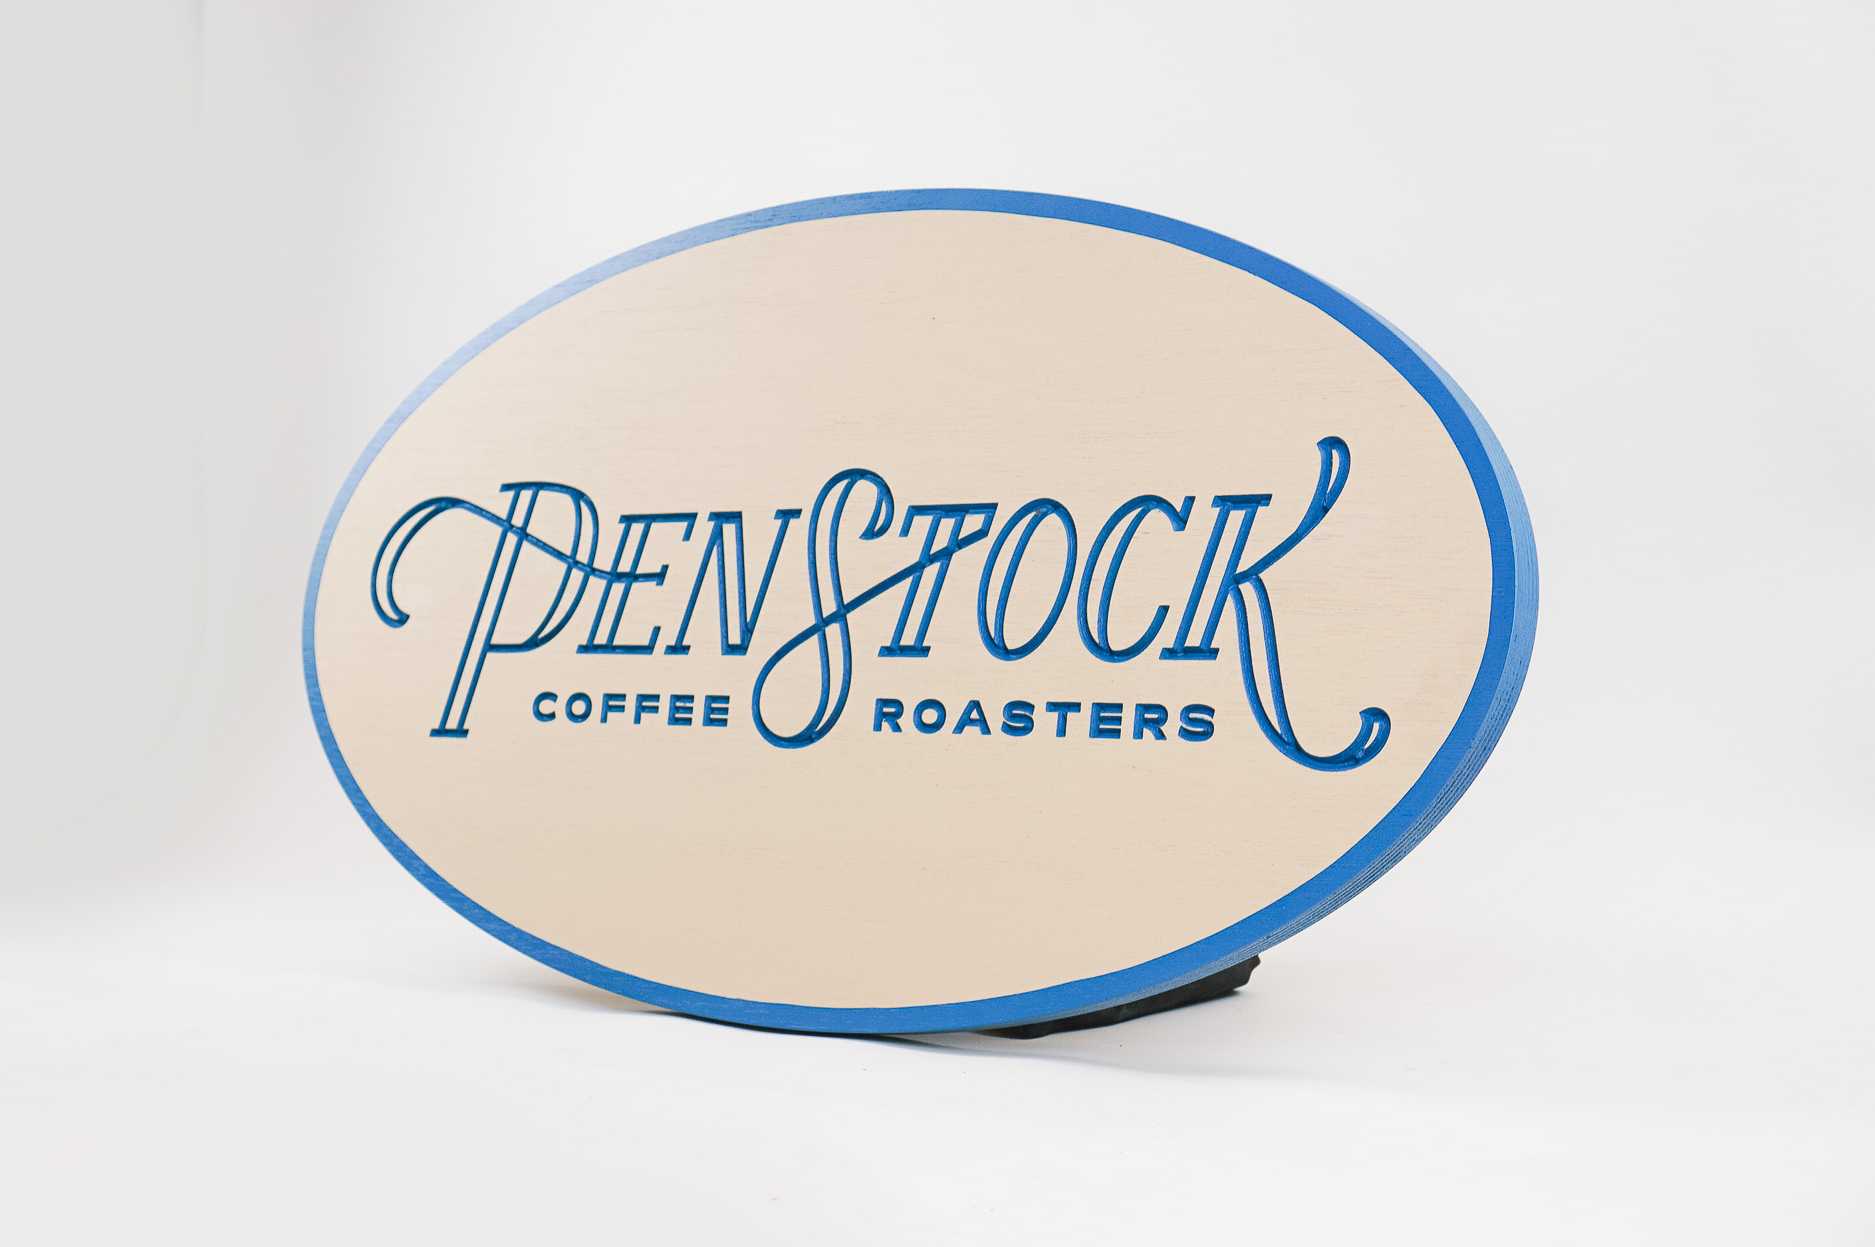 Blue and light wood engraved sign for Penstock Coffee Roasters, a coffee roastery and specialty coffee shop in New Jersey.